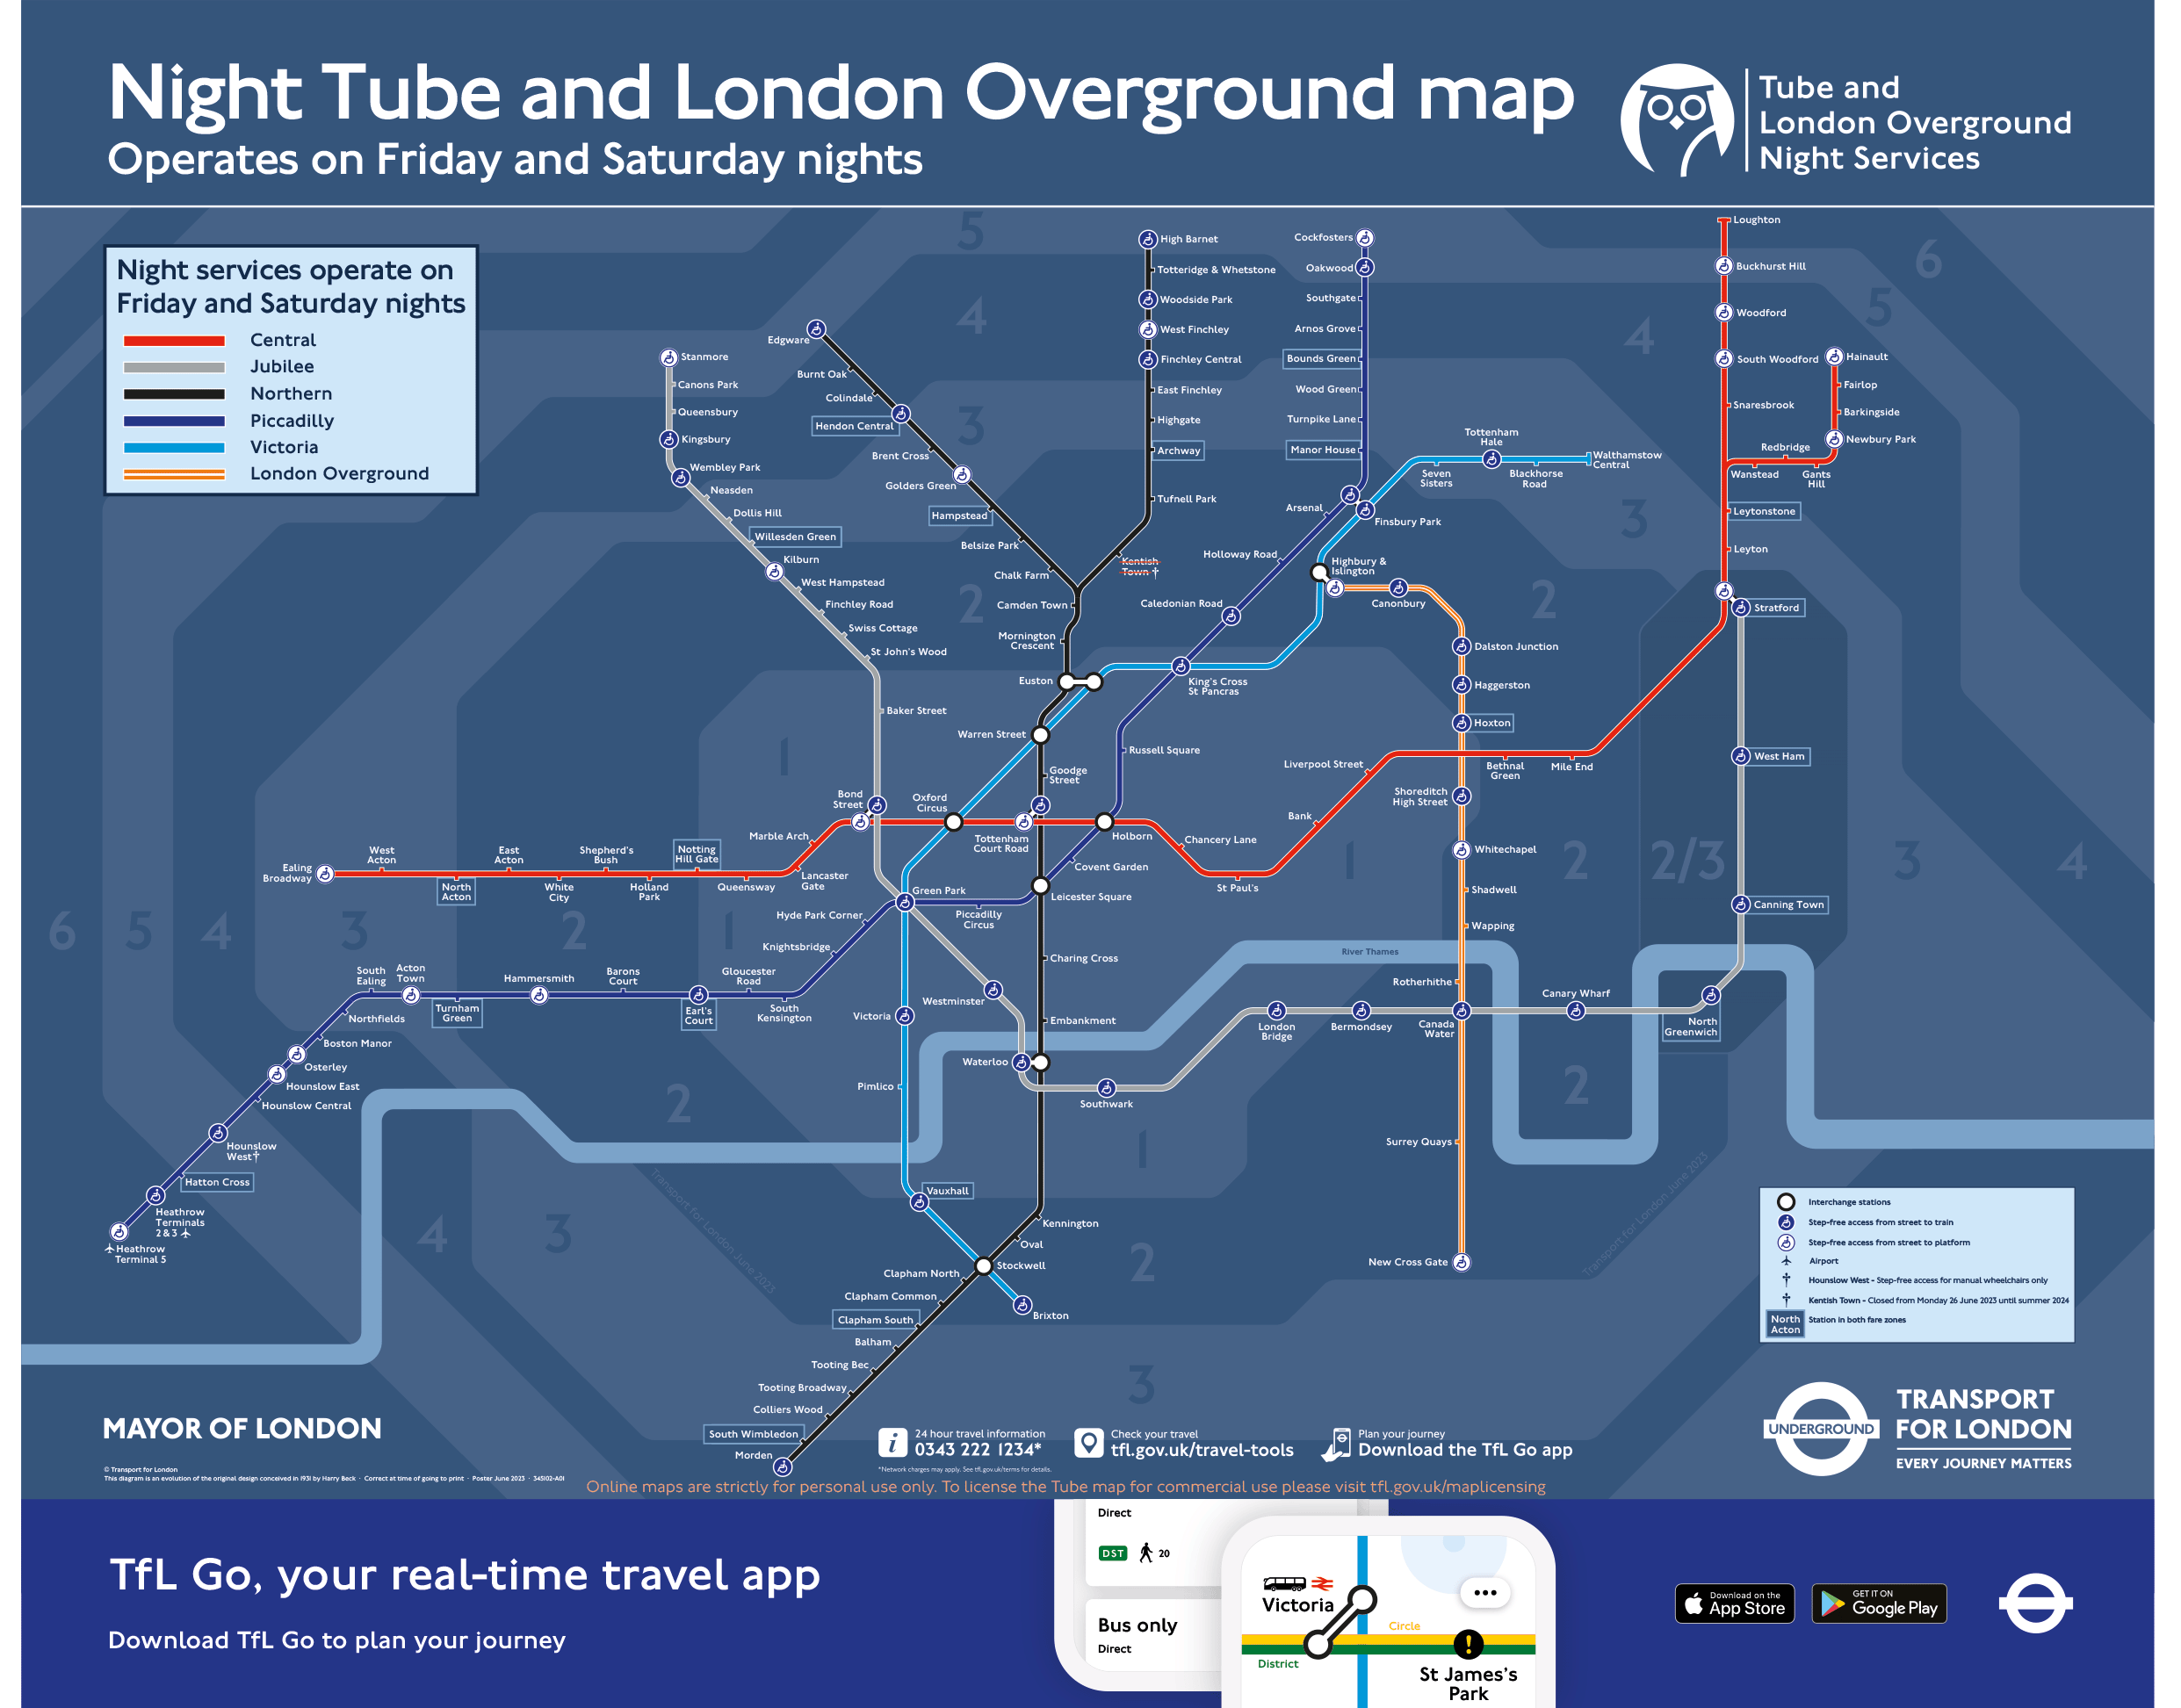 Does the Tube go 24 hours?